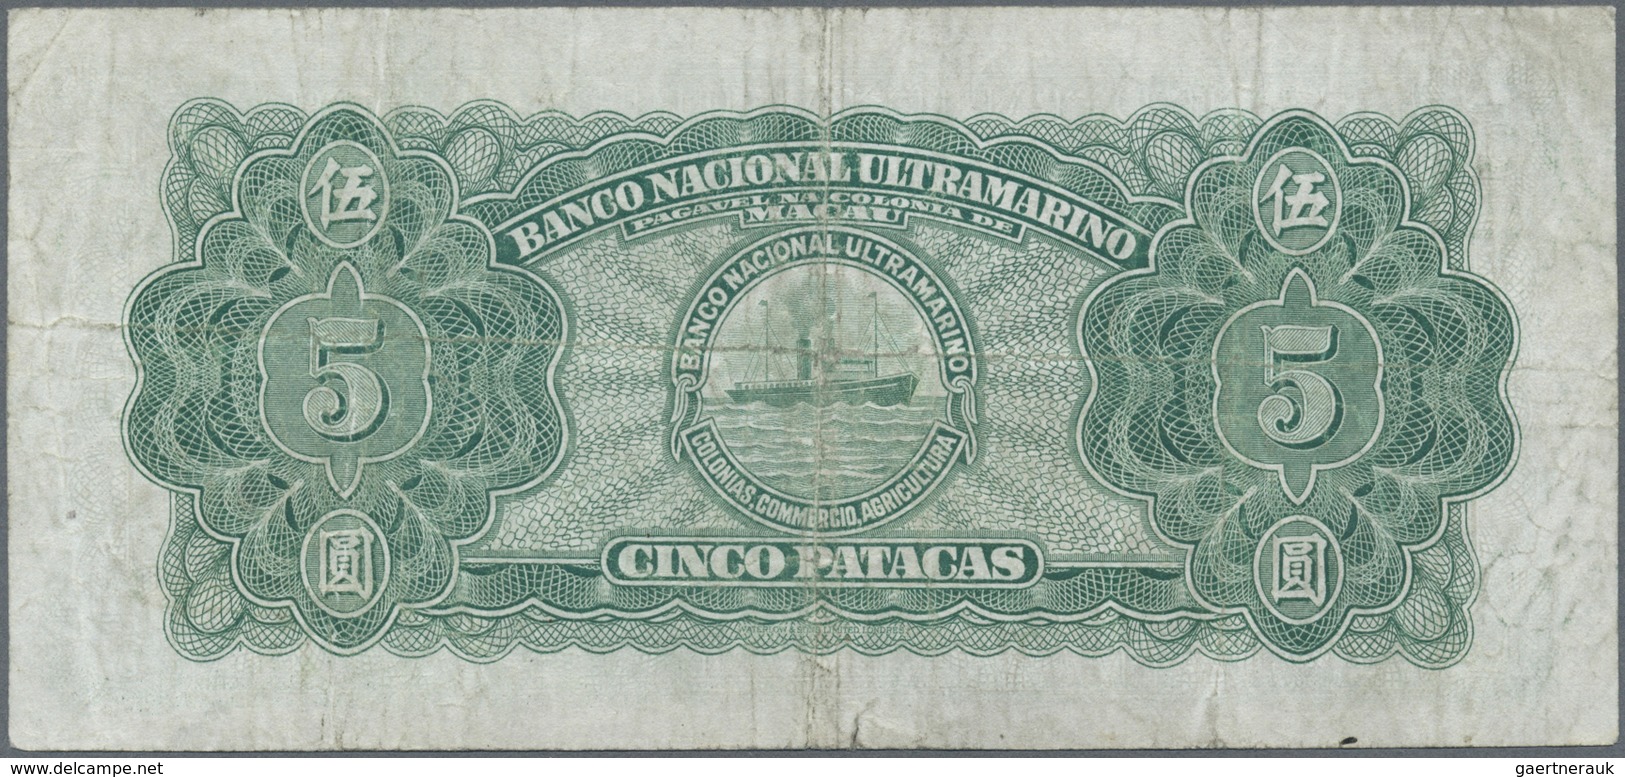 Macau / Macao: 5 Patacas 1945 P. 29, Used With Light Folds In Paper, Probably Pressed, Tiny Border T - Macau